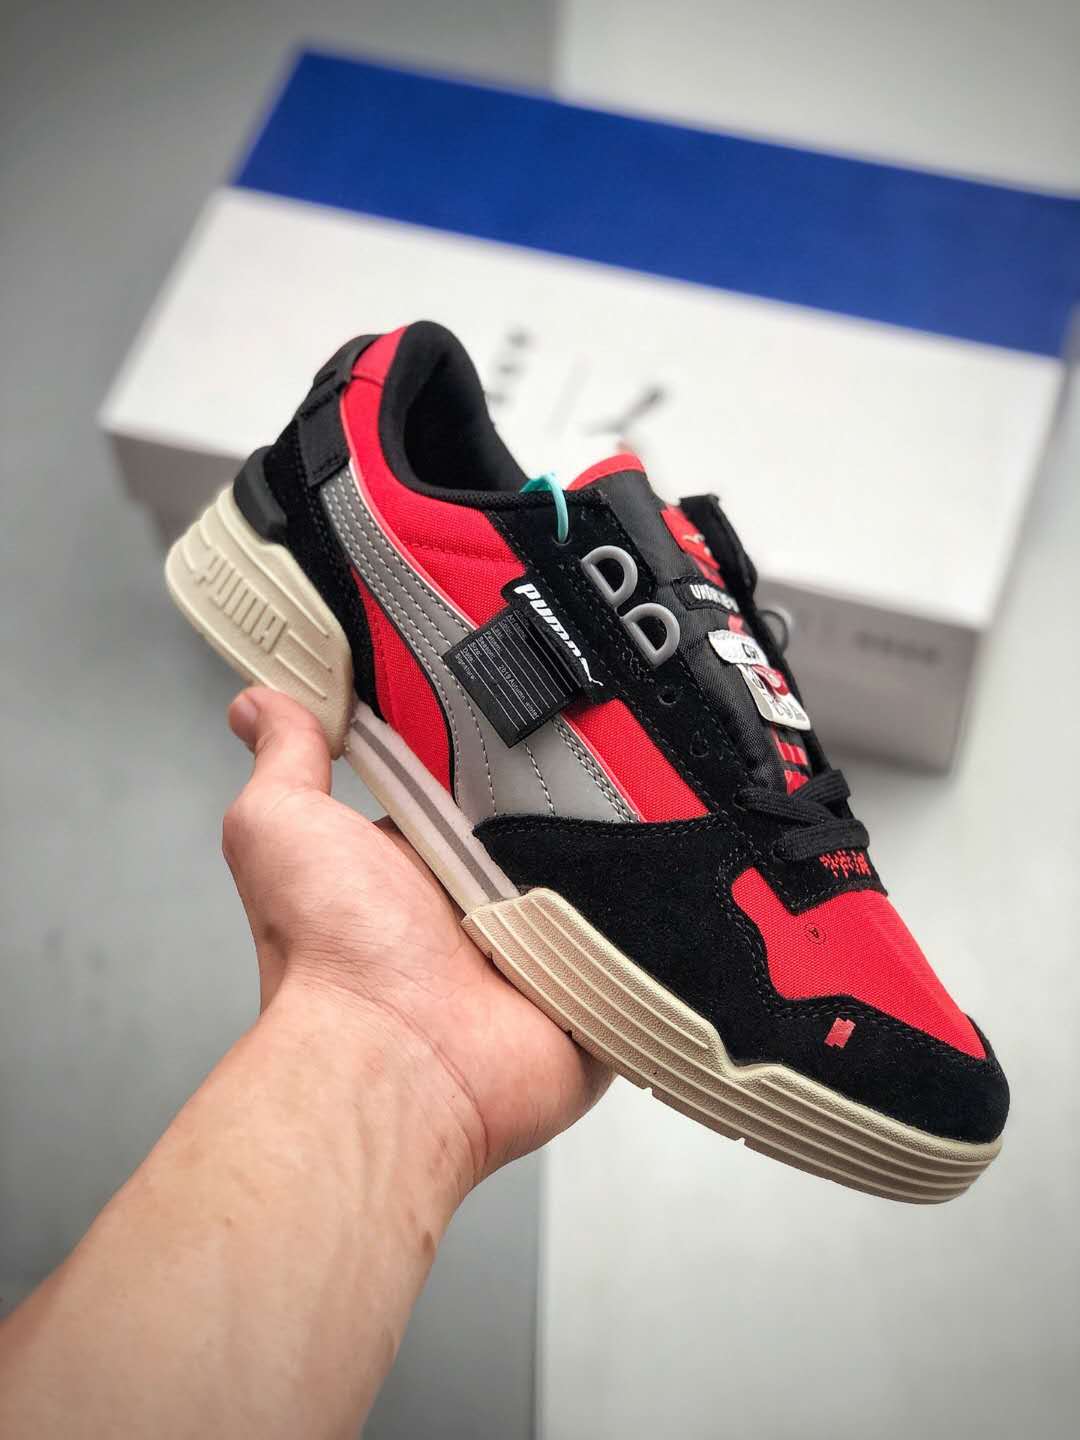 OG ADER Error x Puma CGR Trainers FT3 Whisper White 370108-02 - Shop the Exclusive Collaboration!